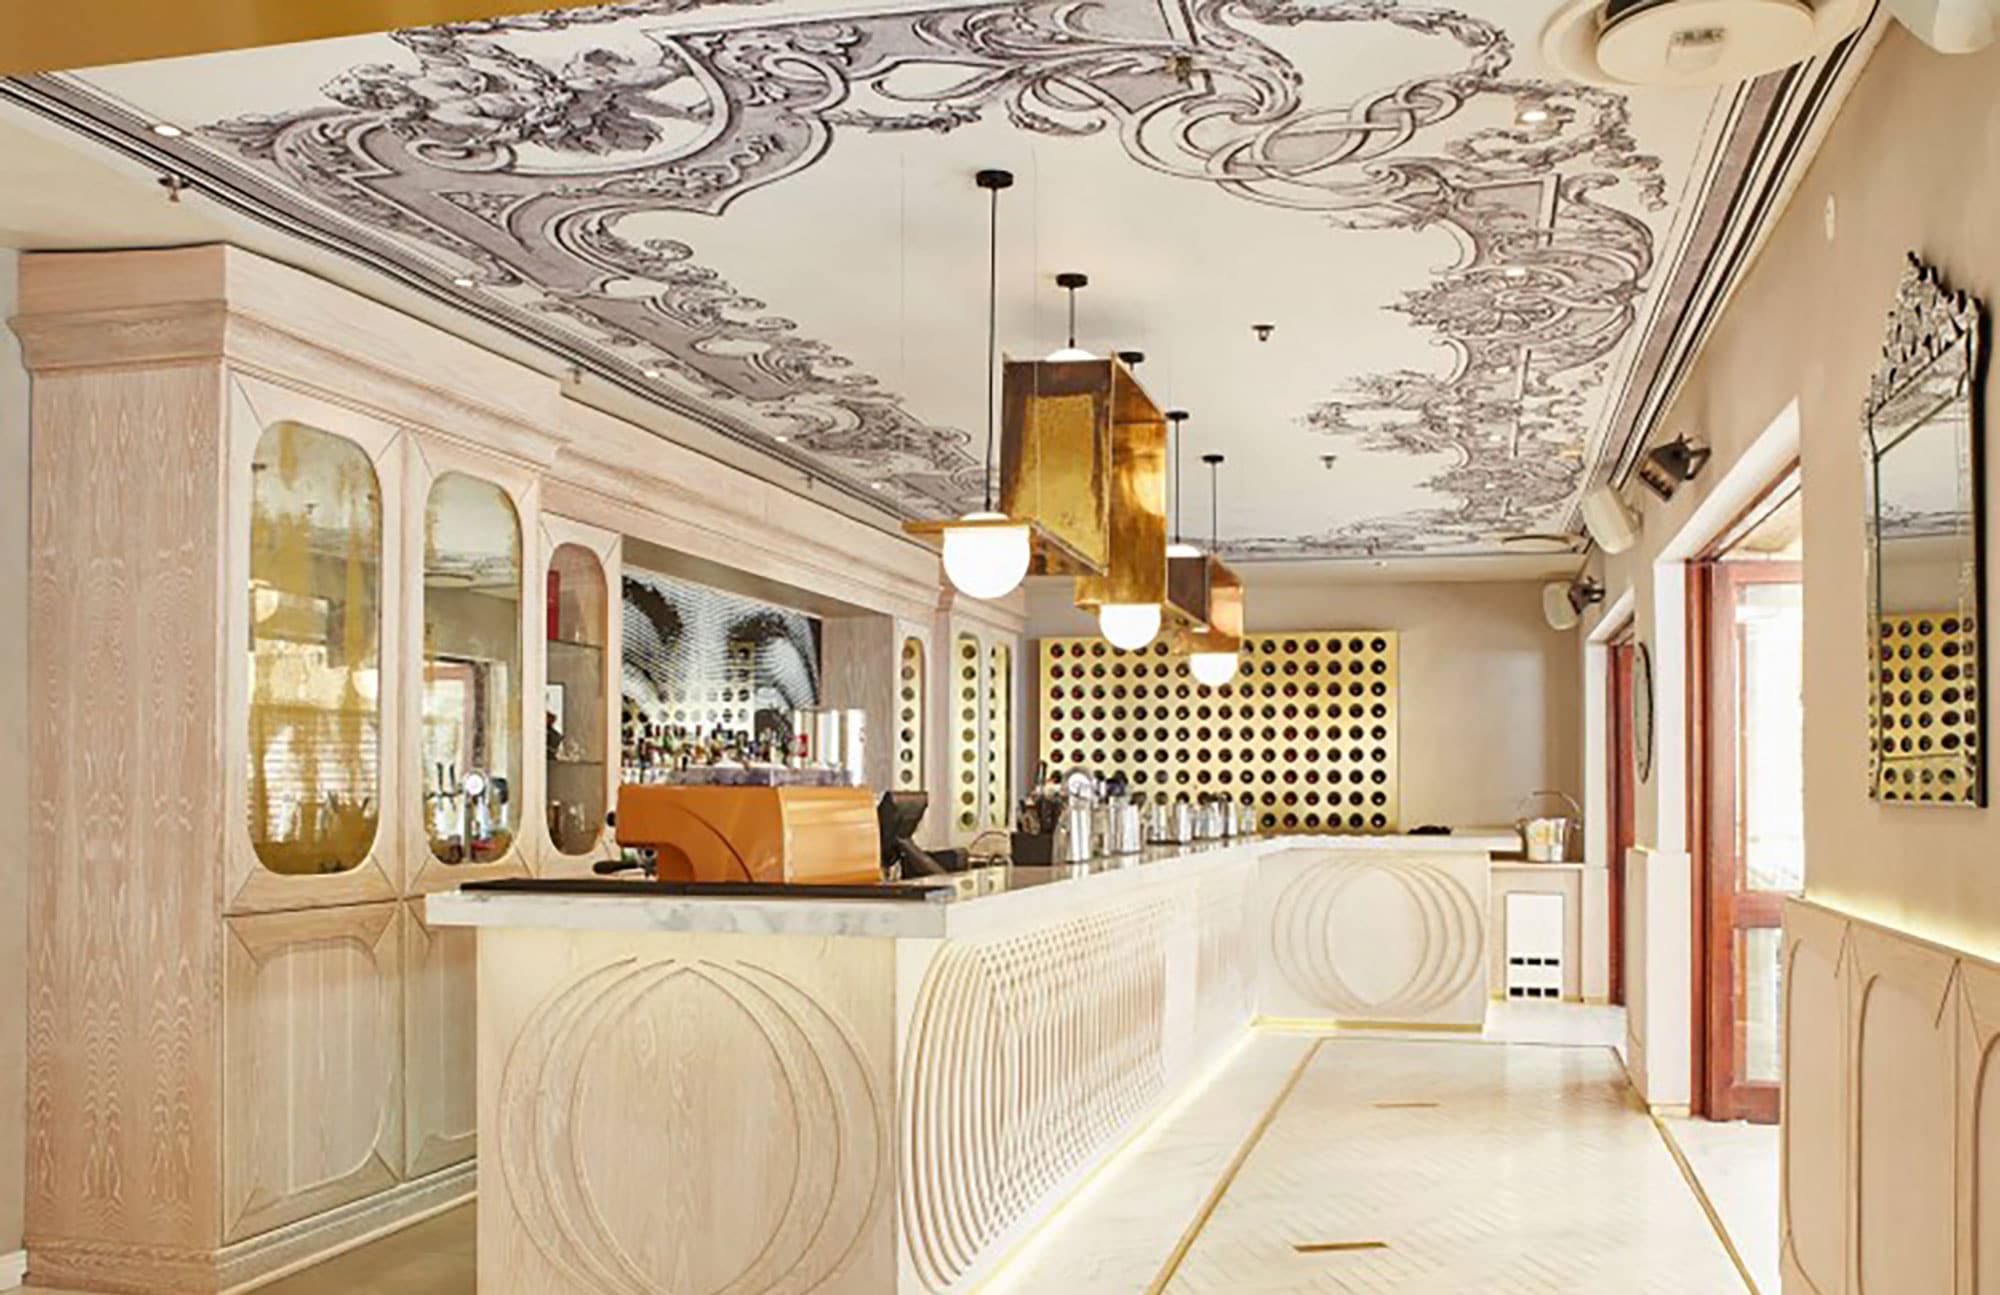 Look up: Consider offering wallcoverings for your customer’s ceilings.